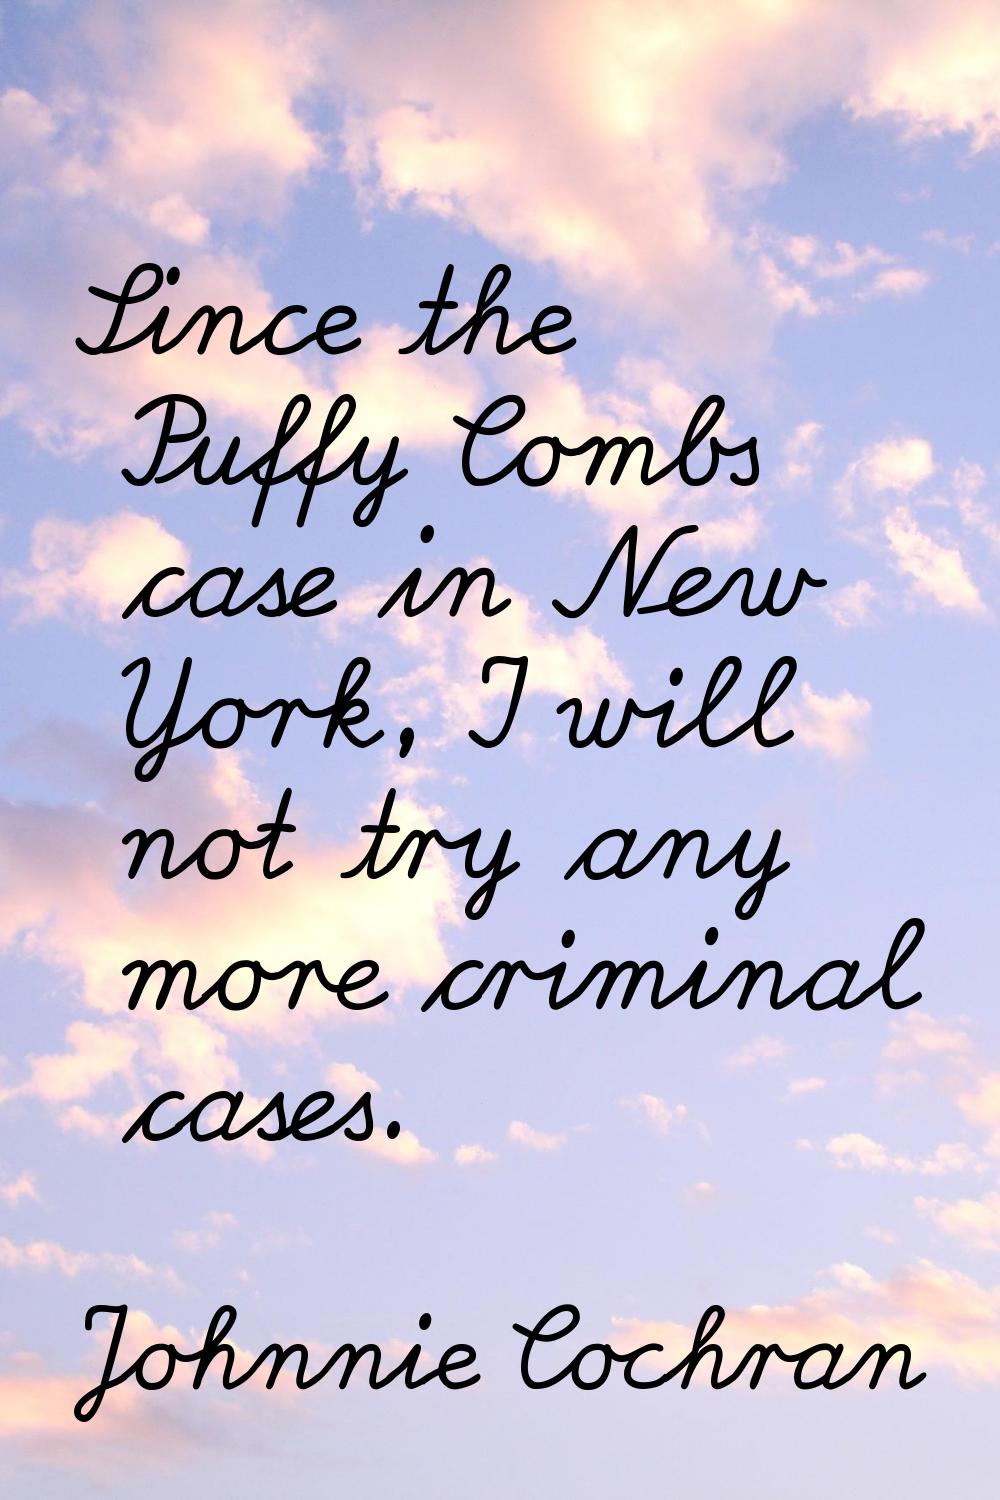 Since the Puffy Combs case in New York, I will not try any more criminal cases.